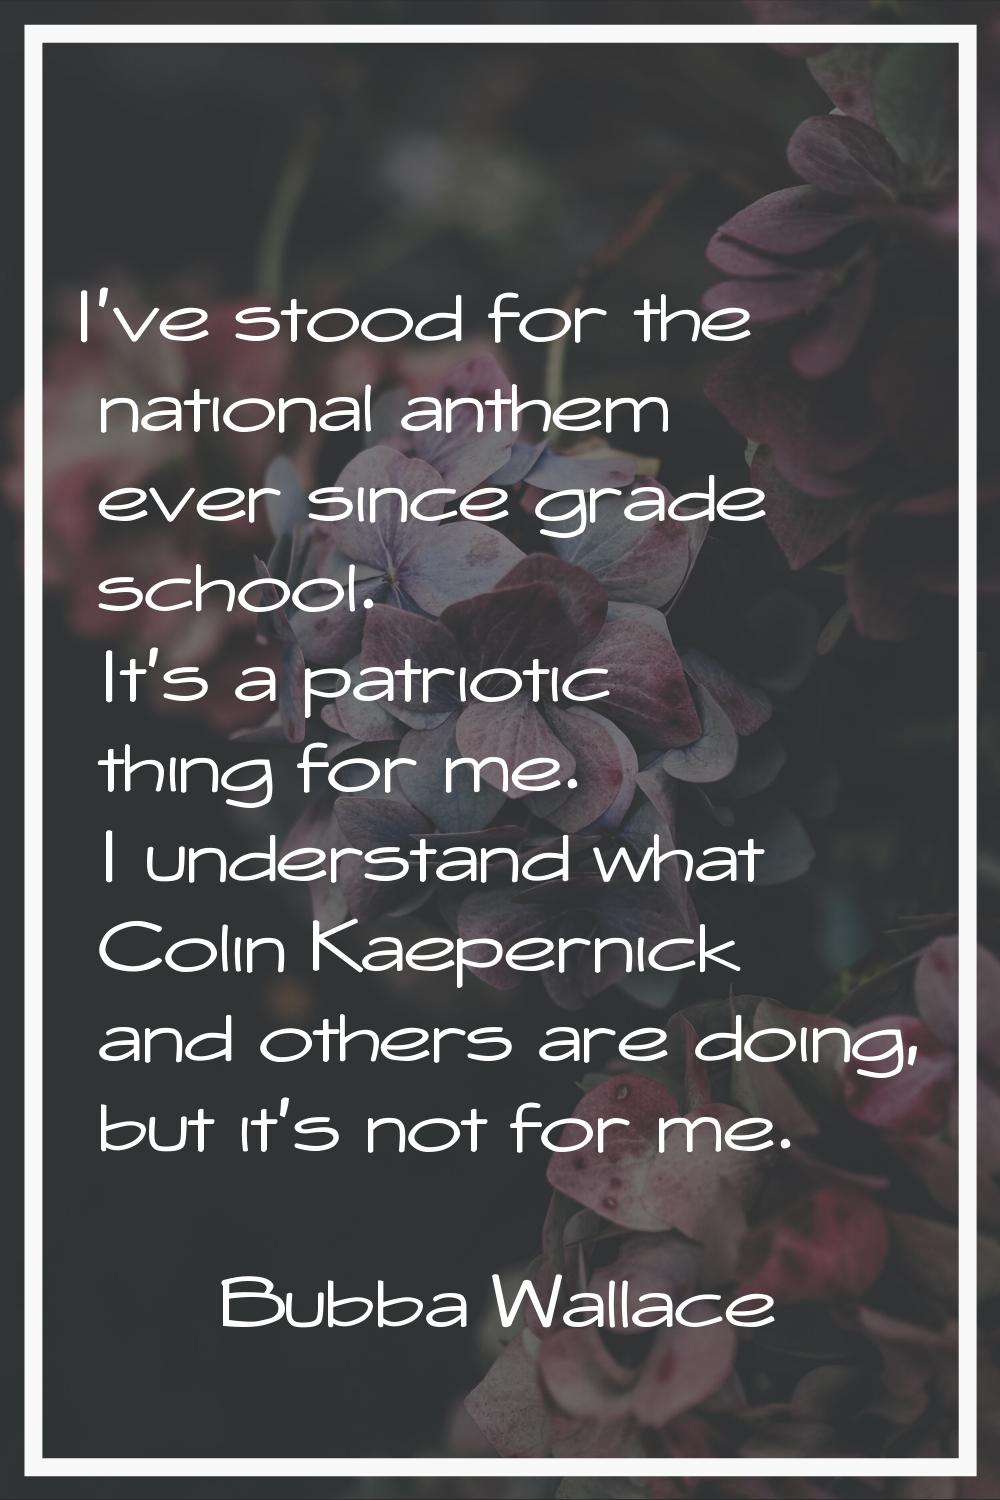 I've stood for the national anthem ever since grade school. It's a patriotic thing for me. I unders